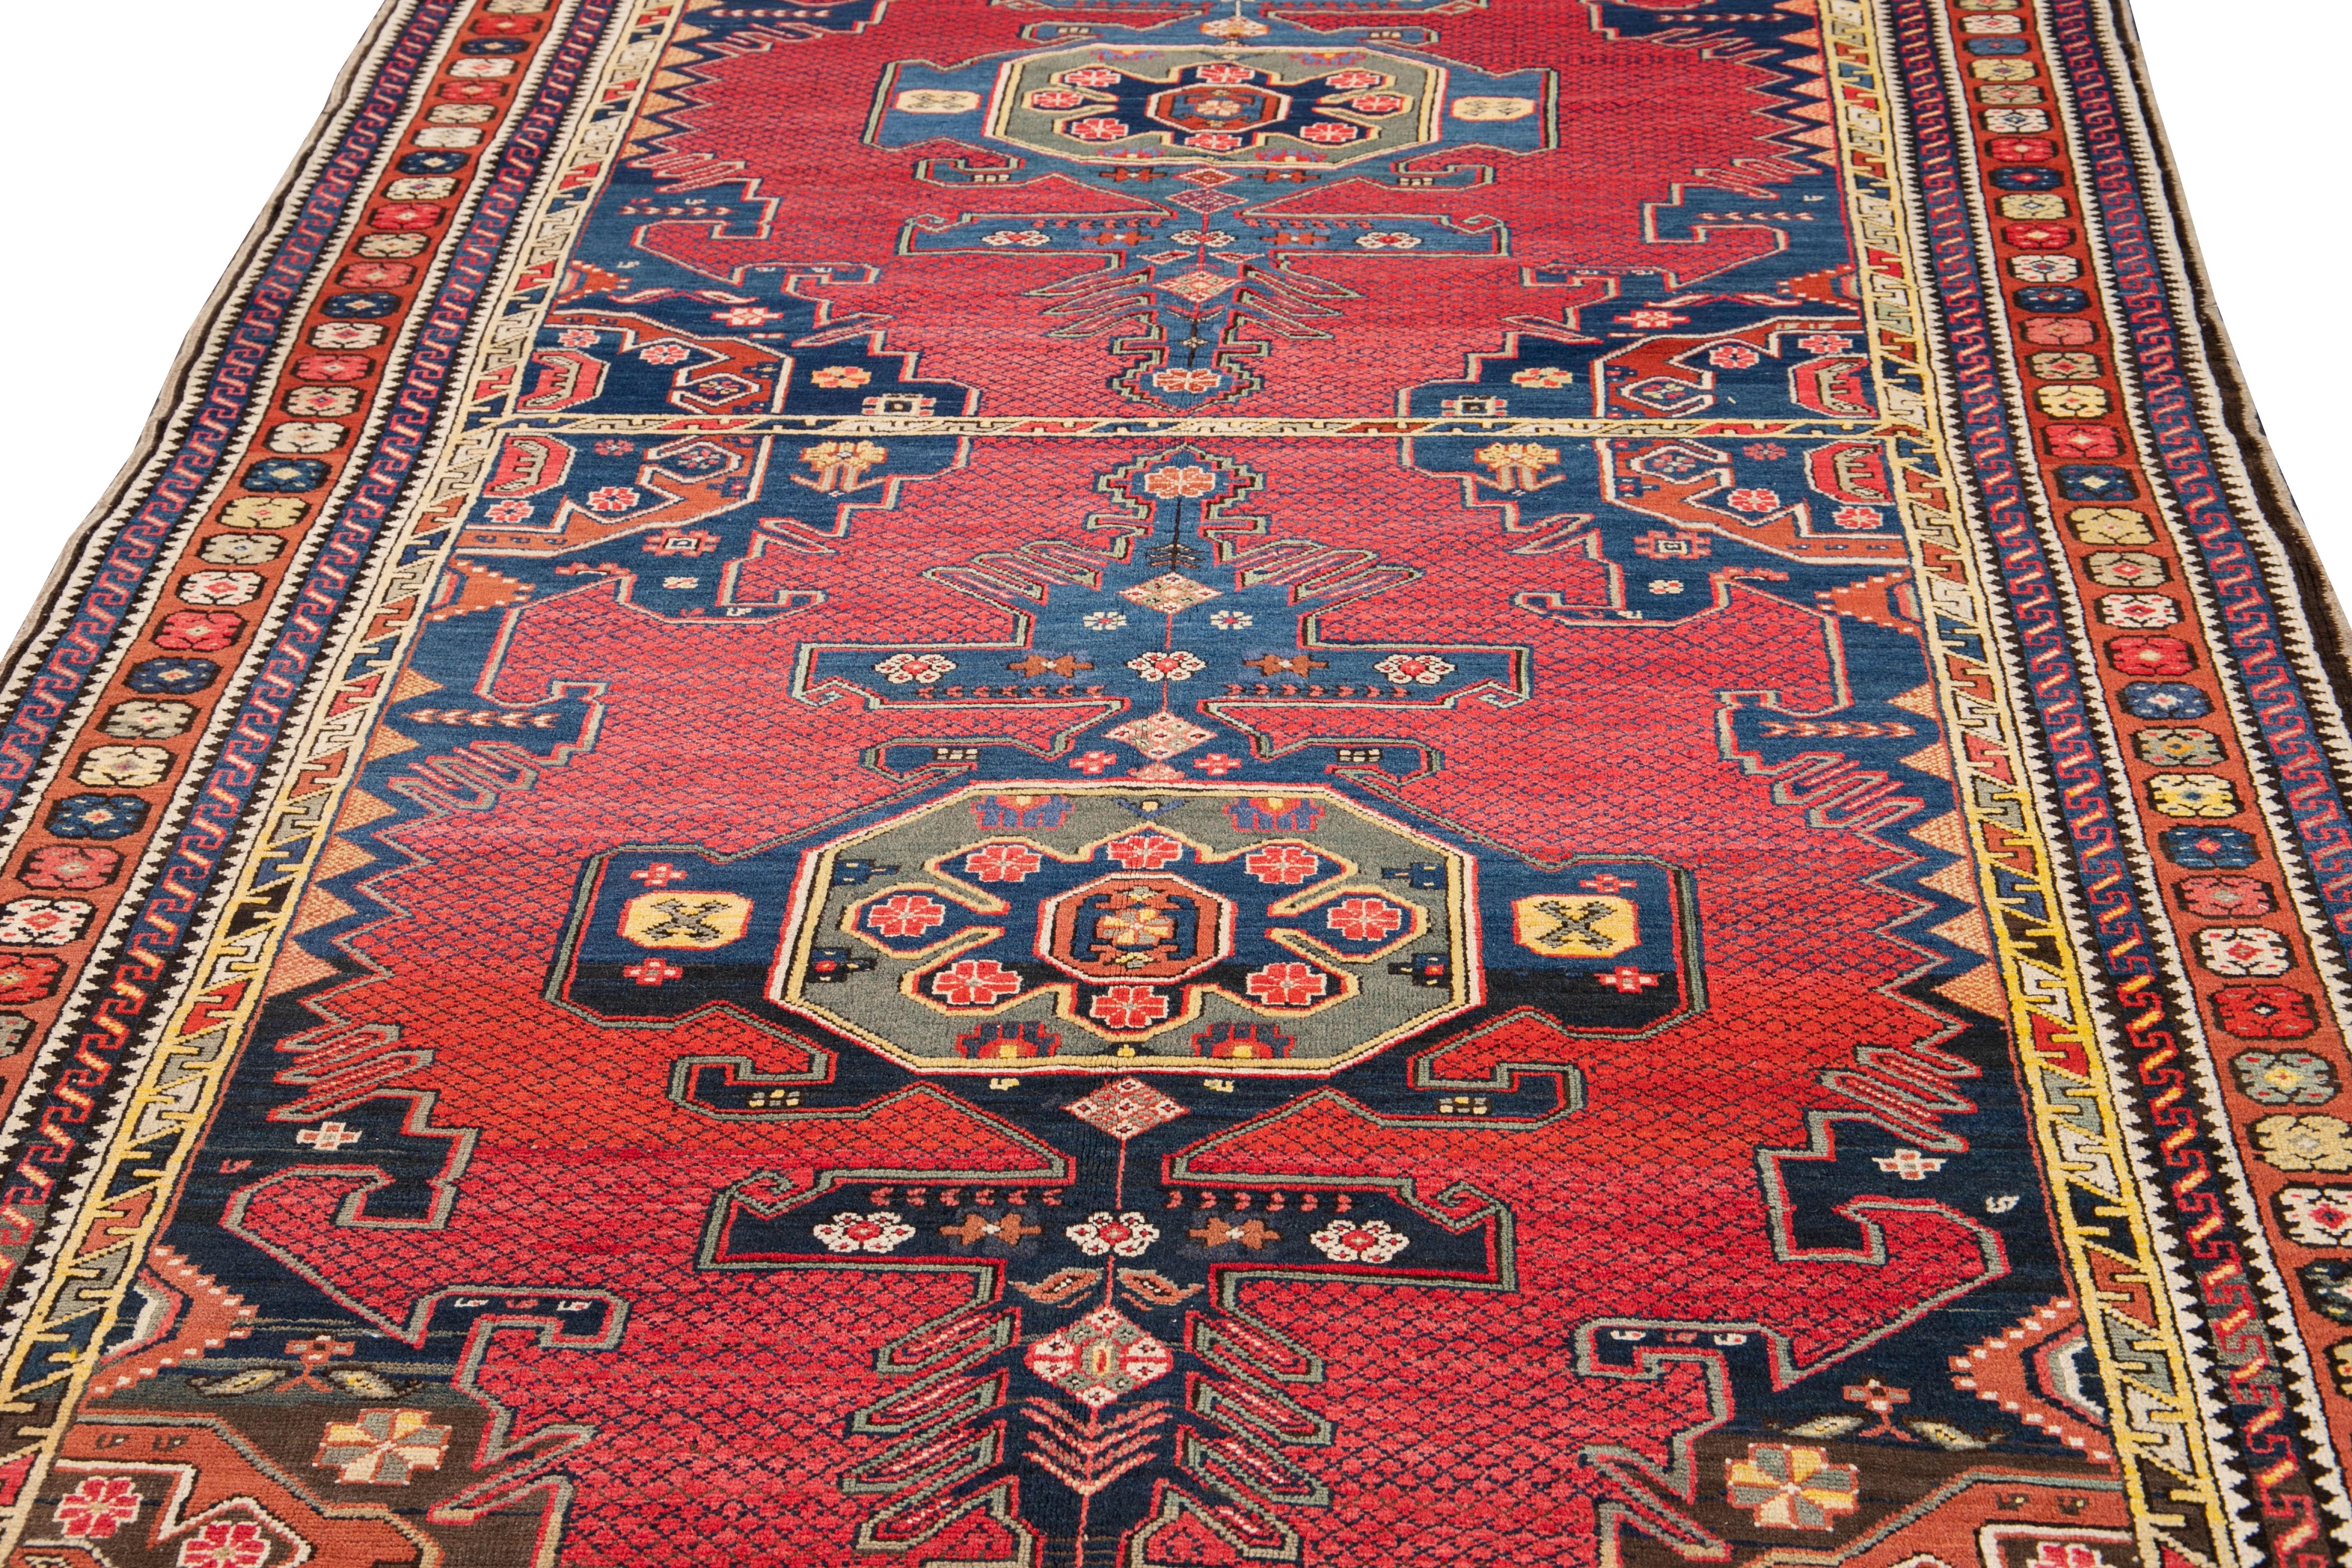 Beautiful antique Kazak hand knotted wool rug with a red field. This rug has a rusted color frame and yellow, blue, and gray accents featuring an all-over geometric tribal design.

This rug measures: 5'9